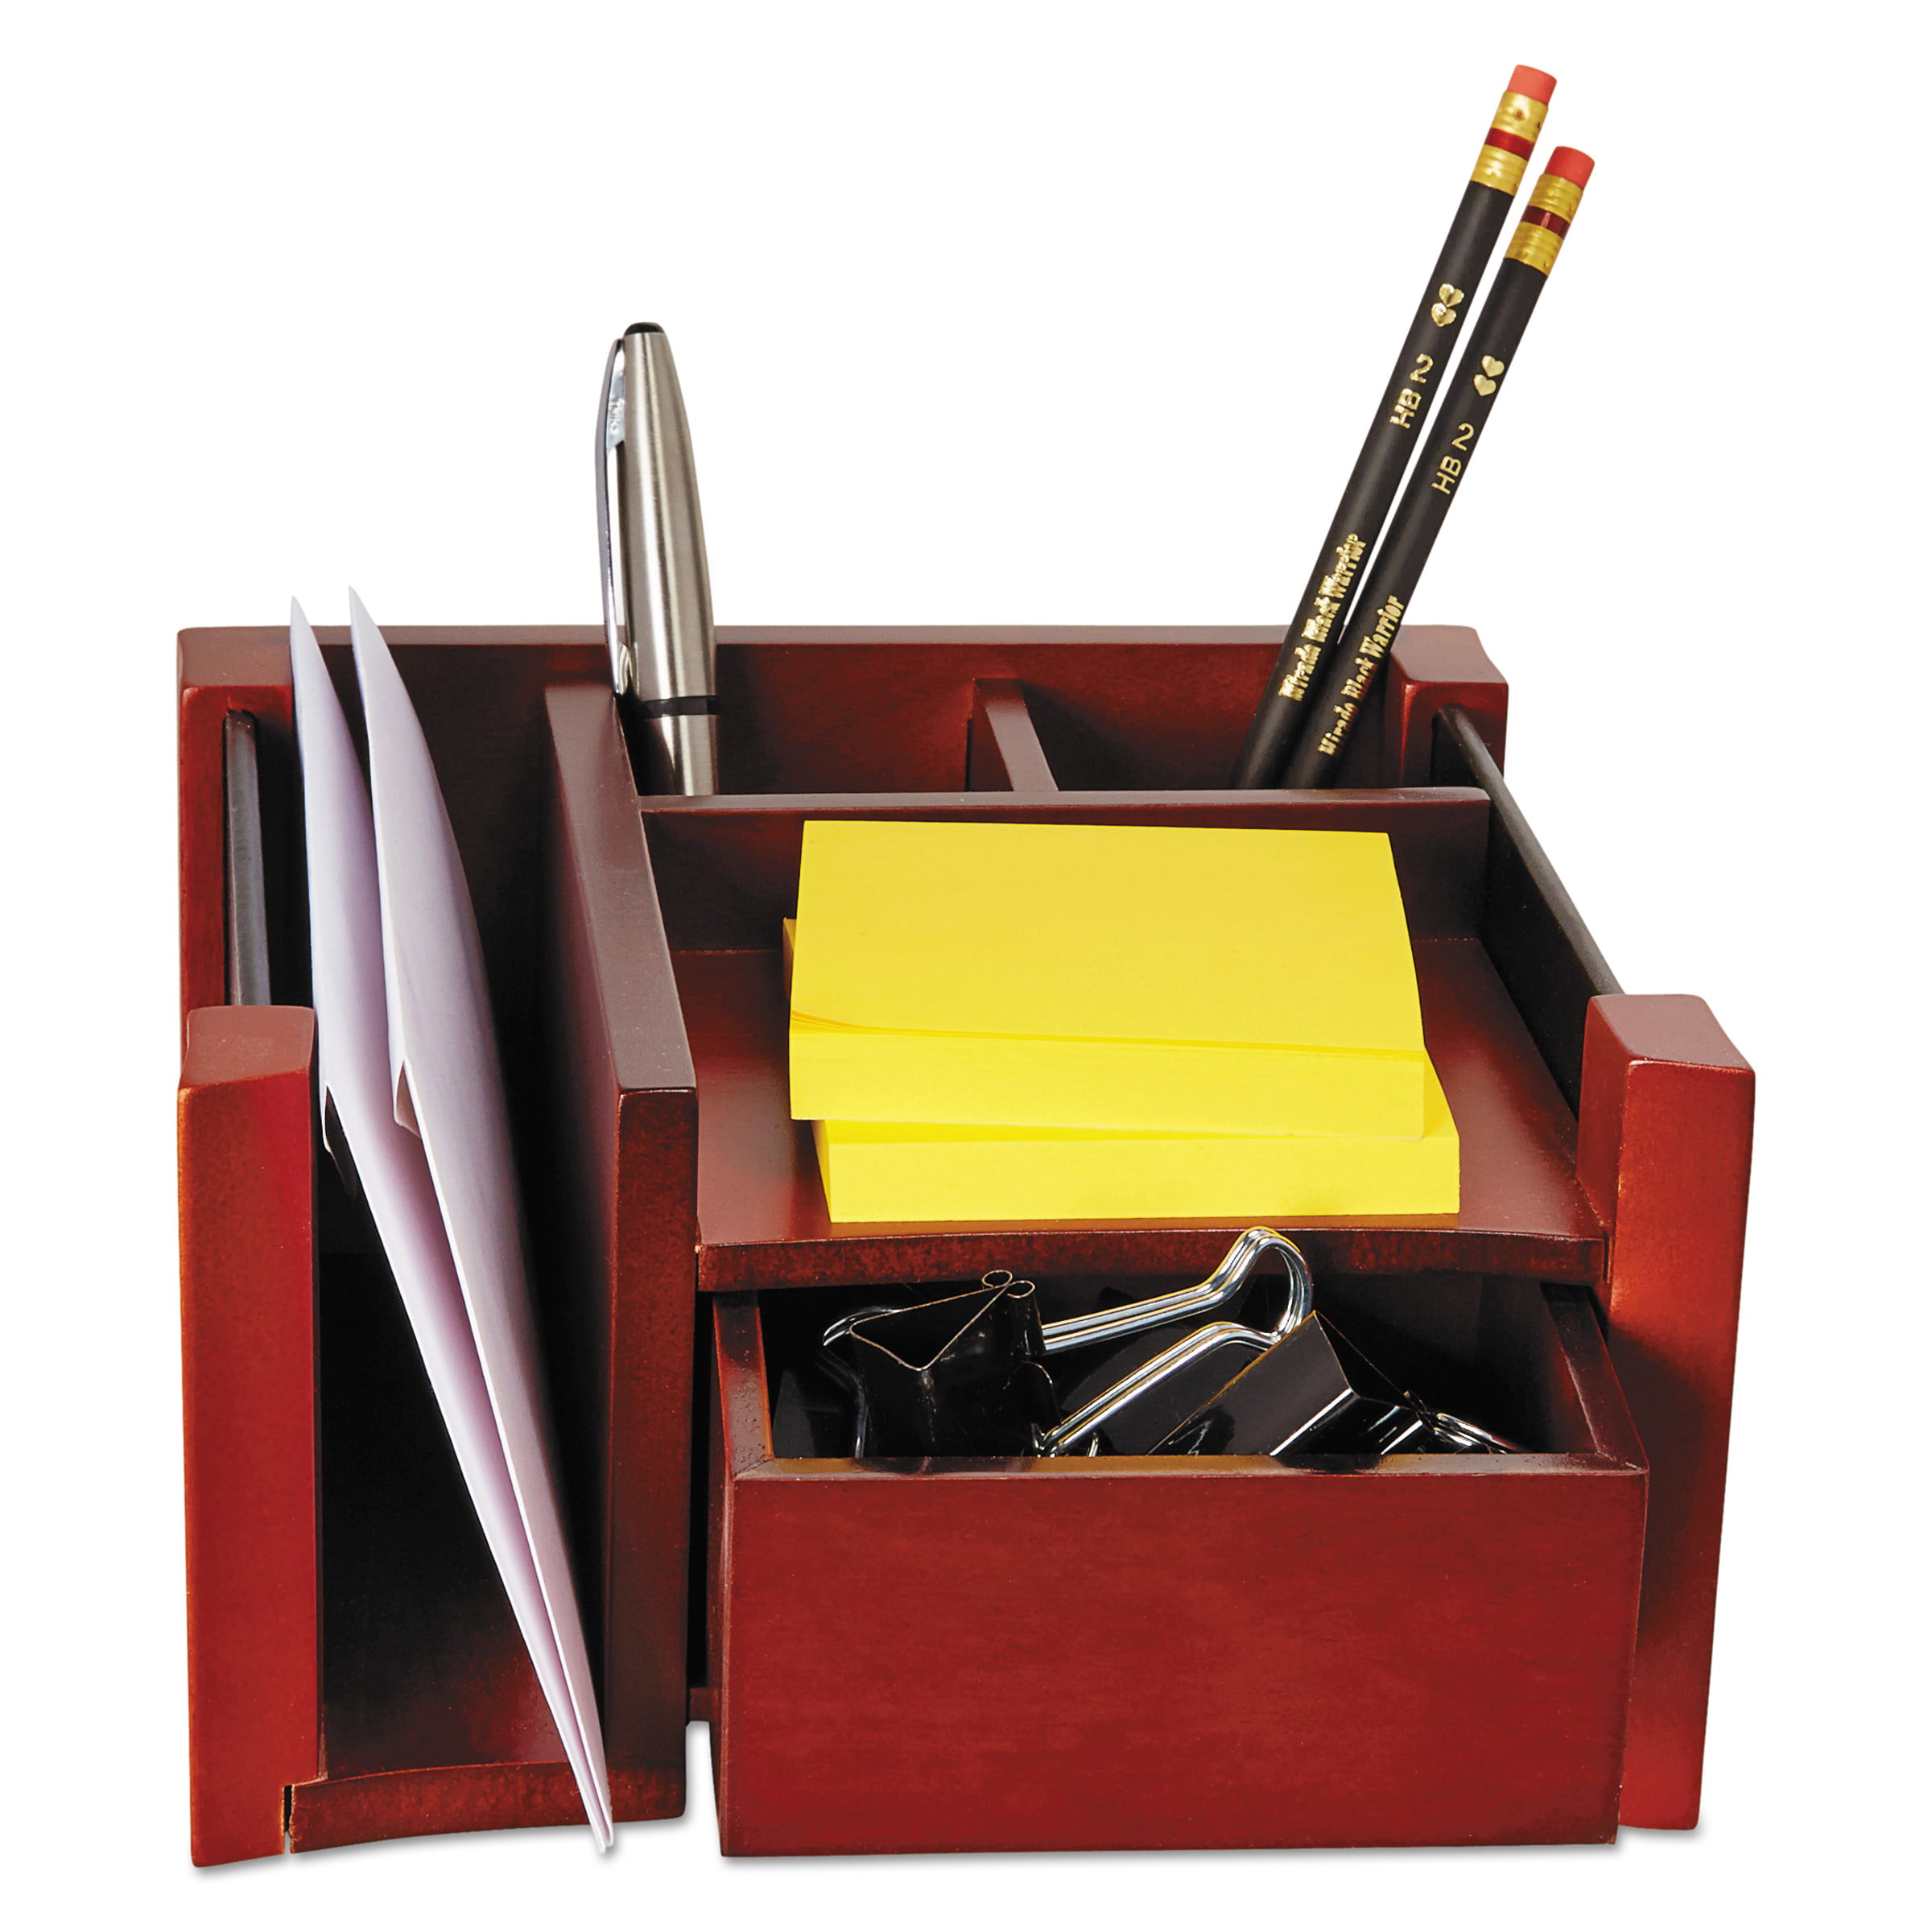 Mahogany and Black 81767 Rolodex Wood and Faux Leather Desk Director 